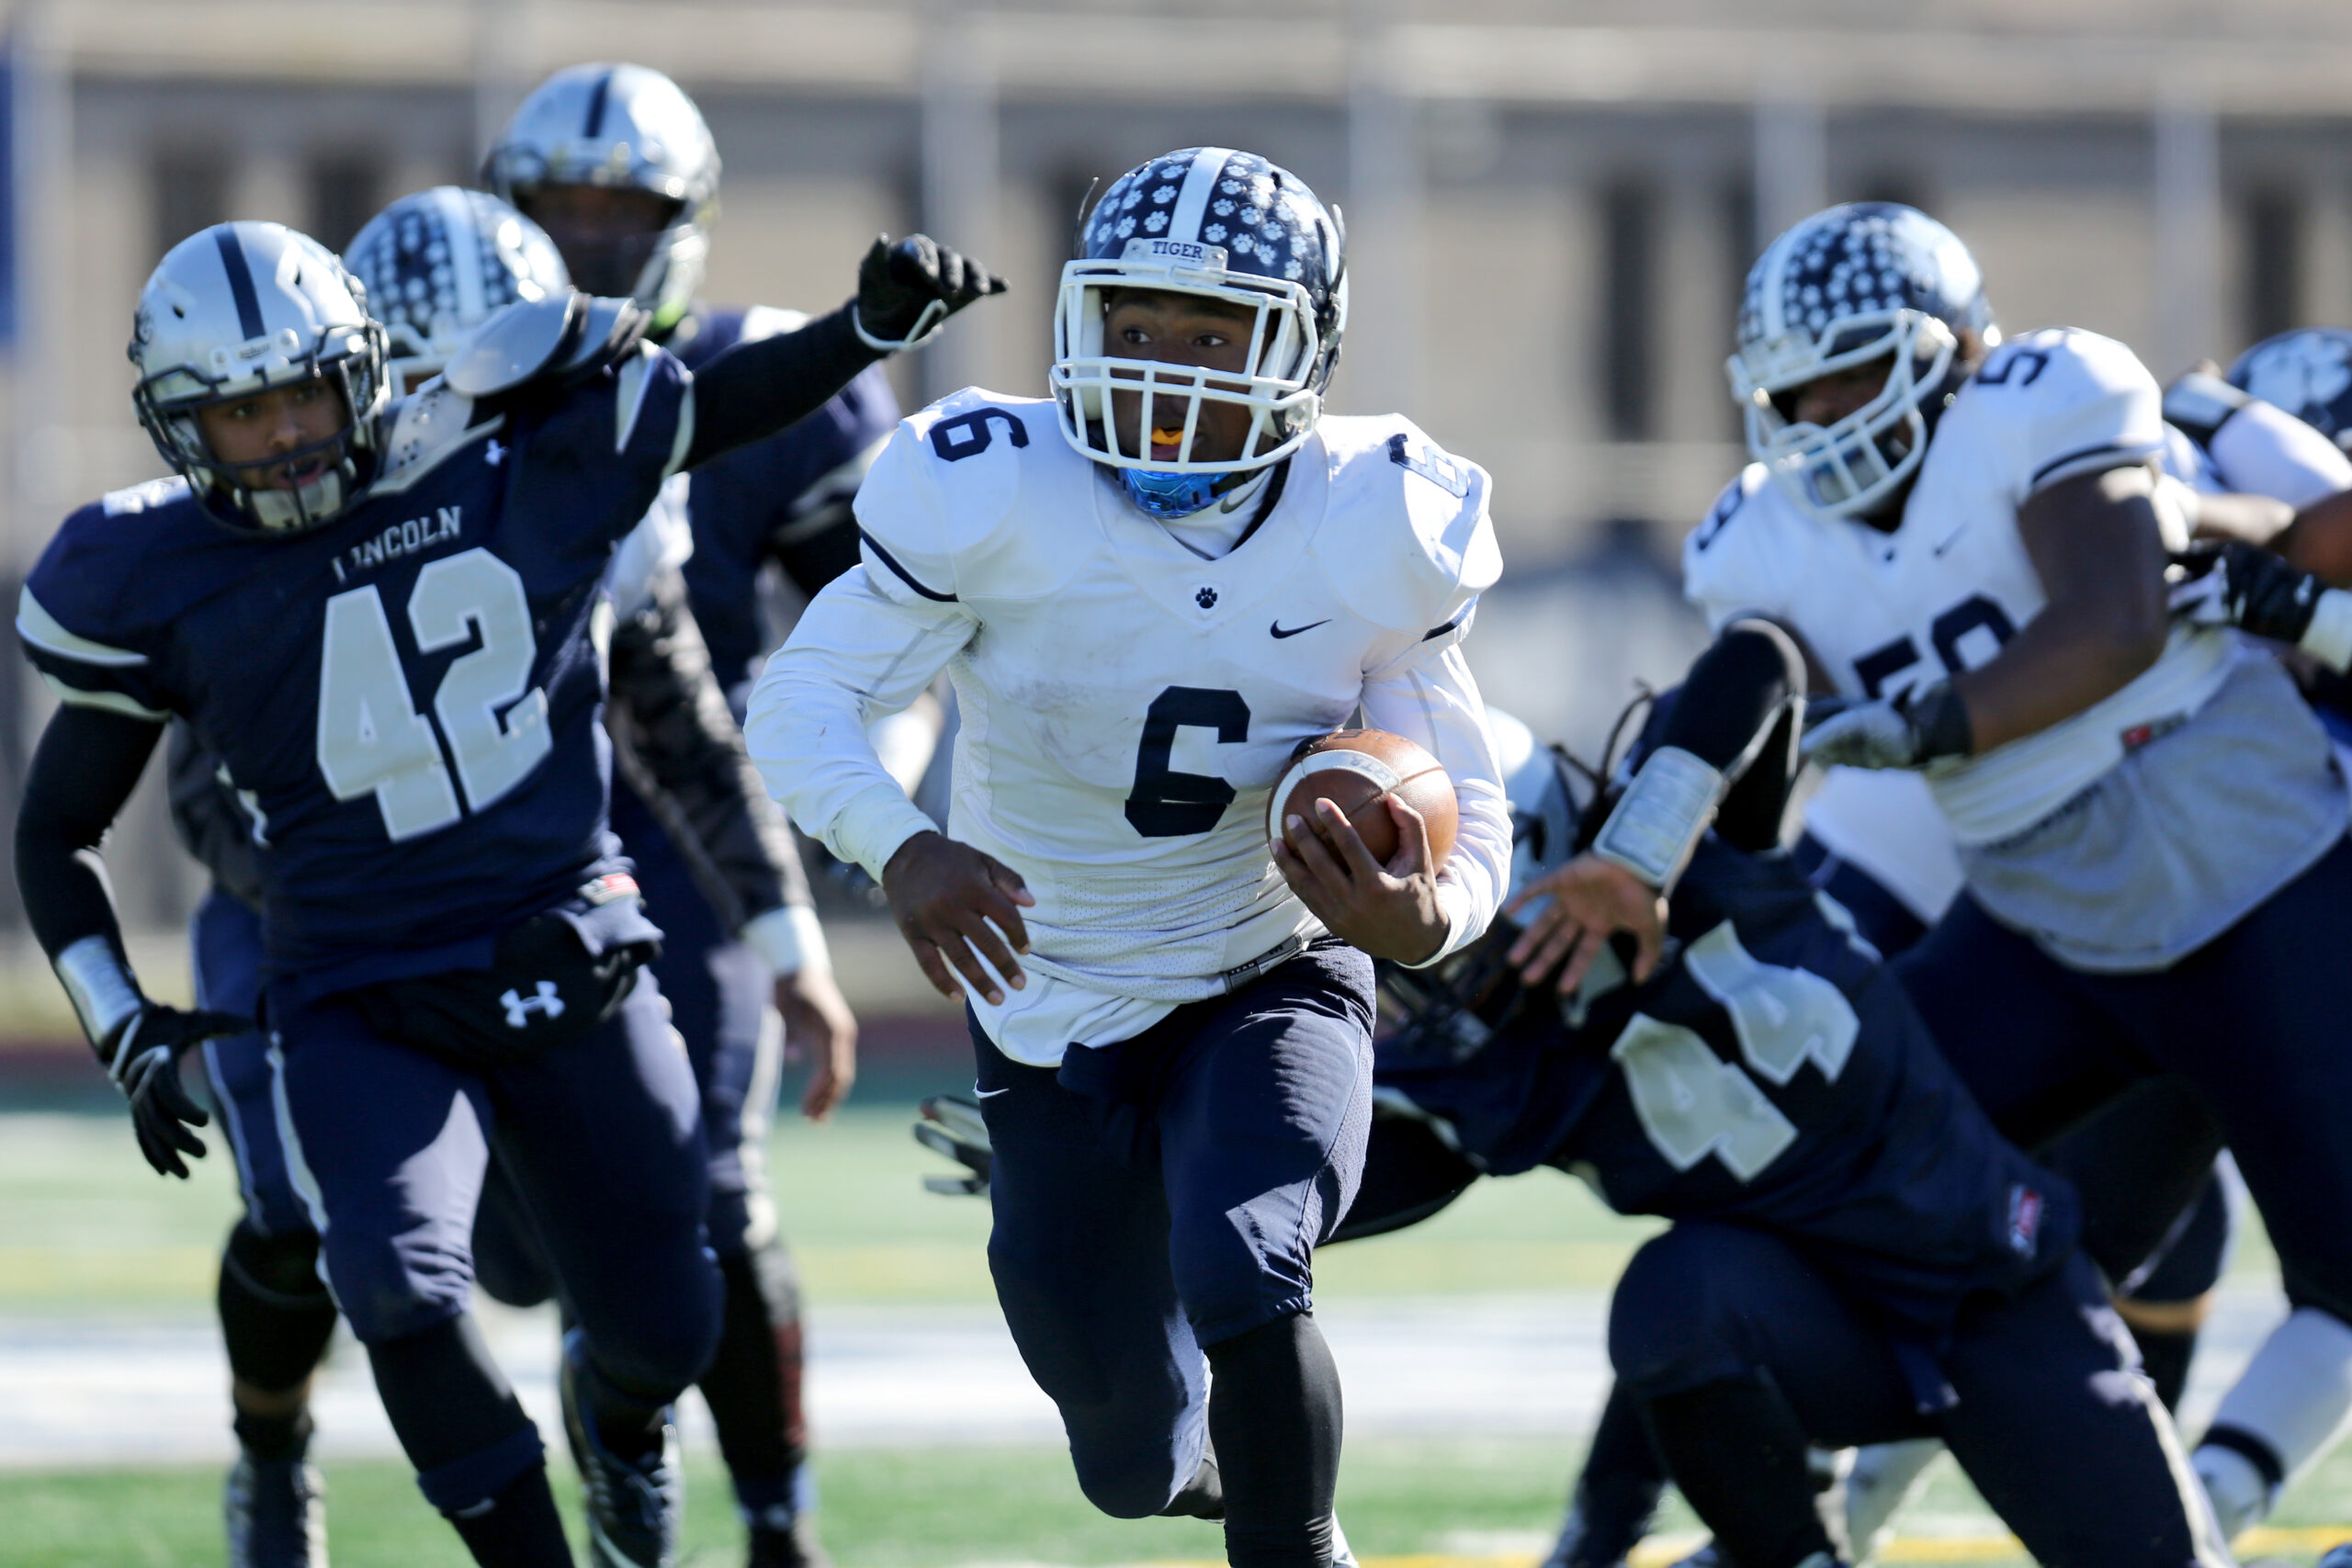 Fort Hamilton Tigers Troy Booker #6 breaks through the line on a first half touchdown run against the Lincoln Railsplitters during a high school football game on Saturday, November 21, 2015 in Brooklyn, NY. Fort Hamilton won and advance in the PSAL playoffs. (AP Photo/Gregory Payan)